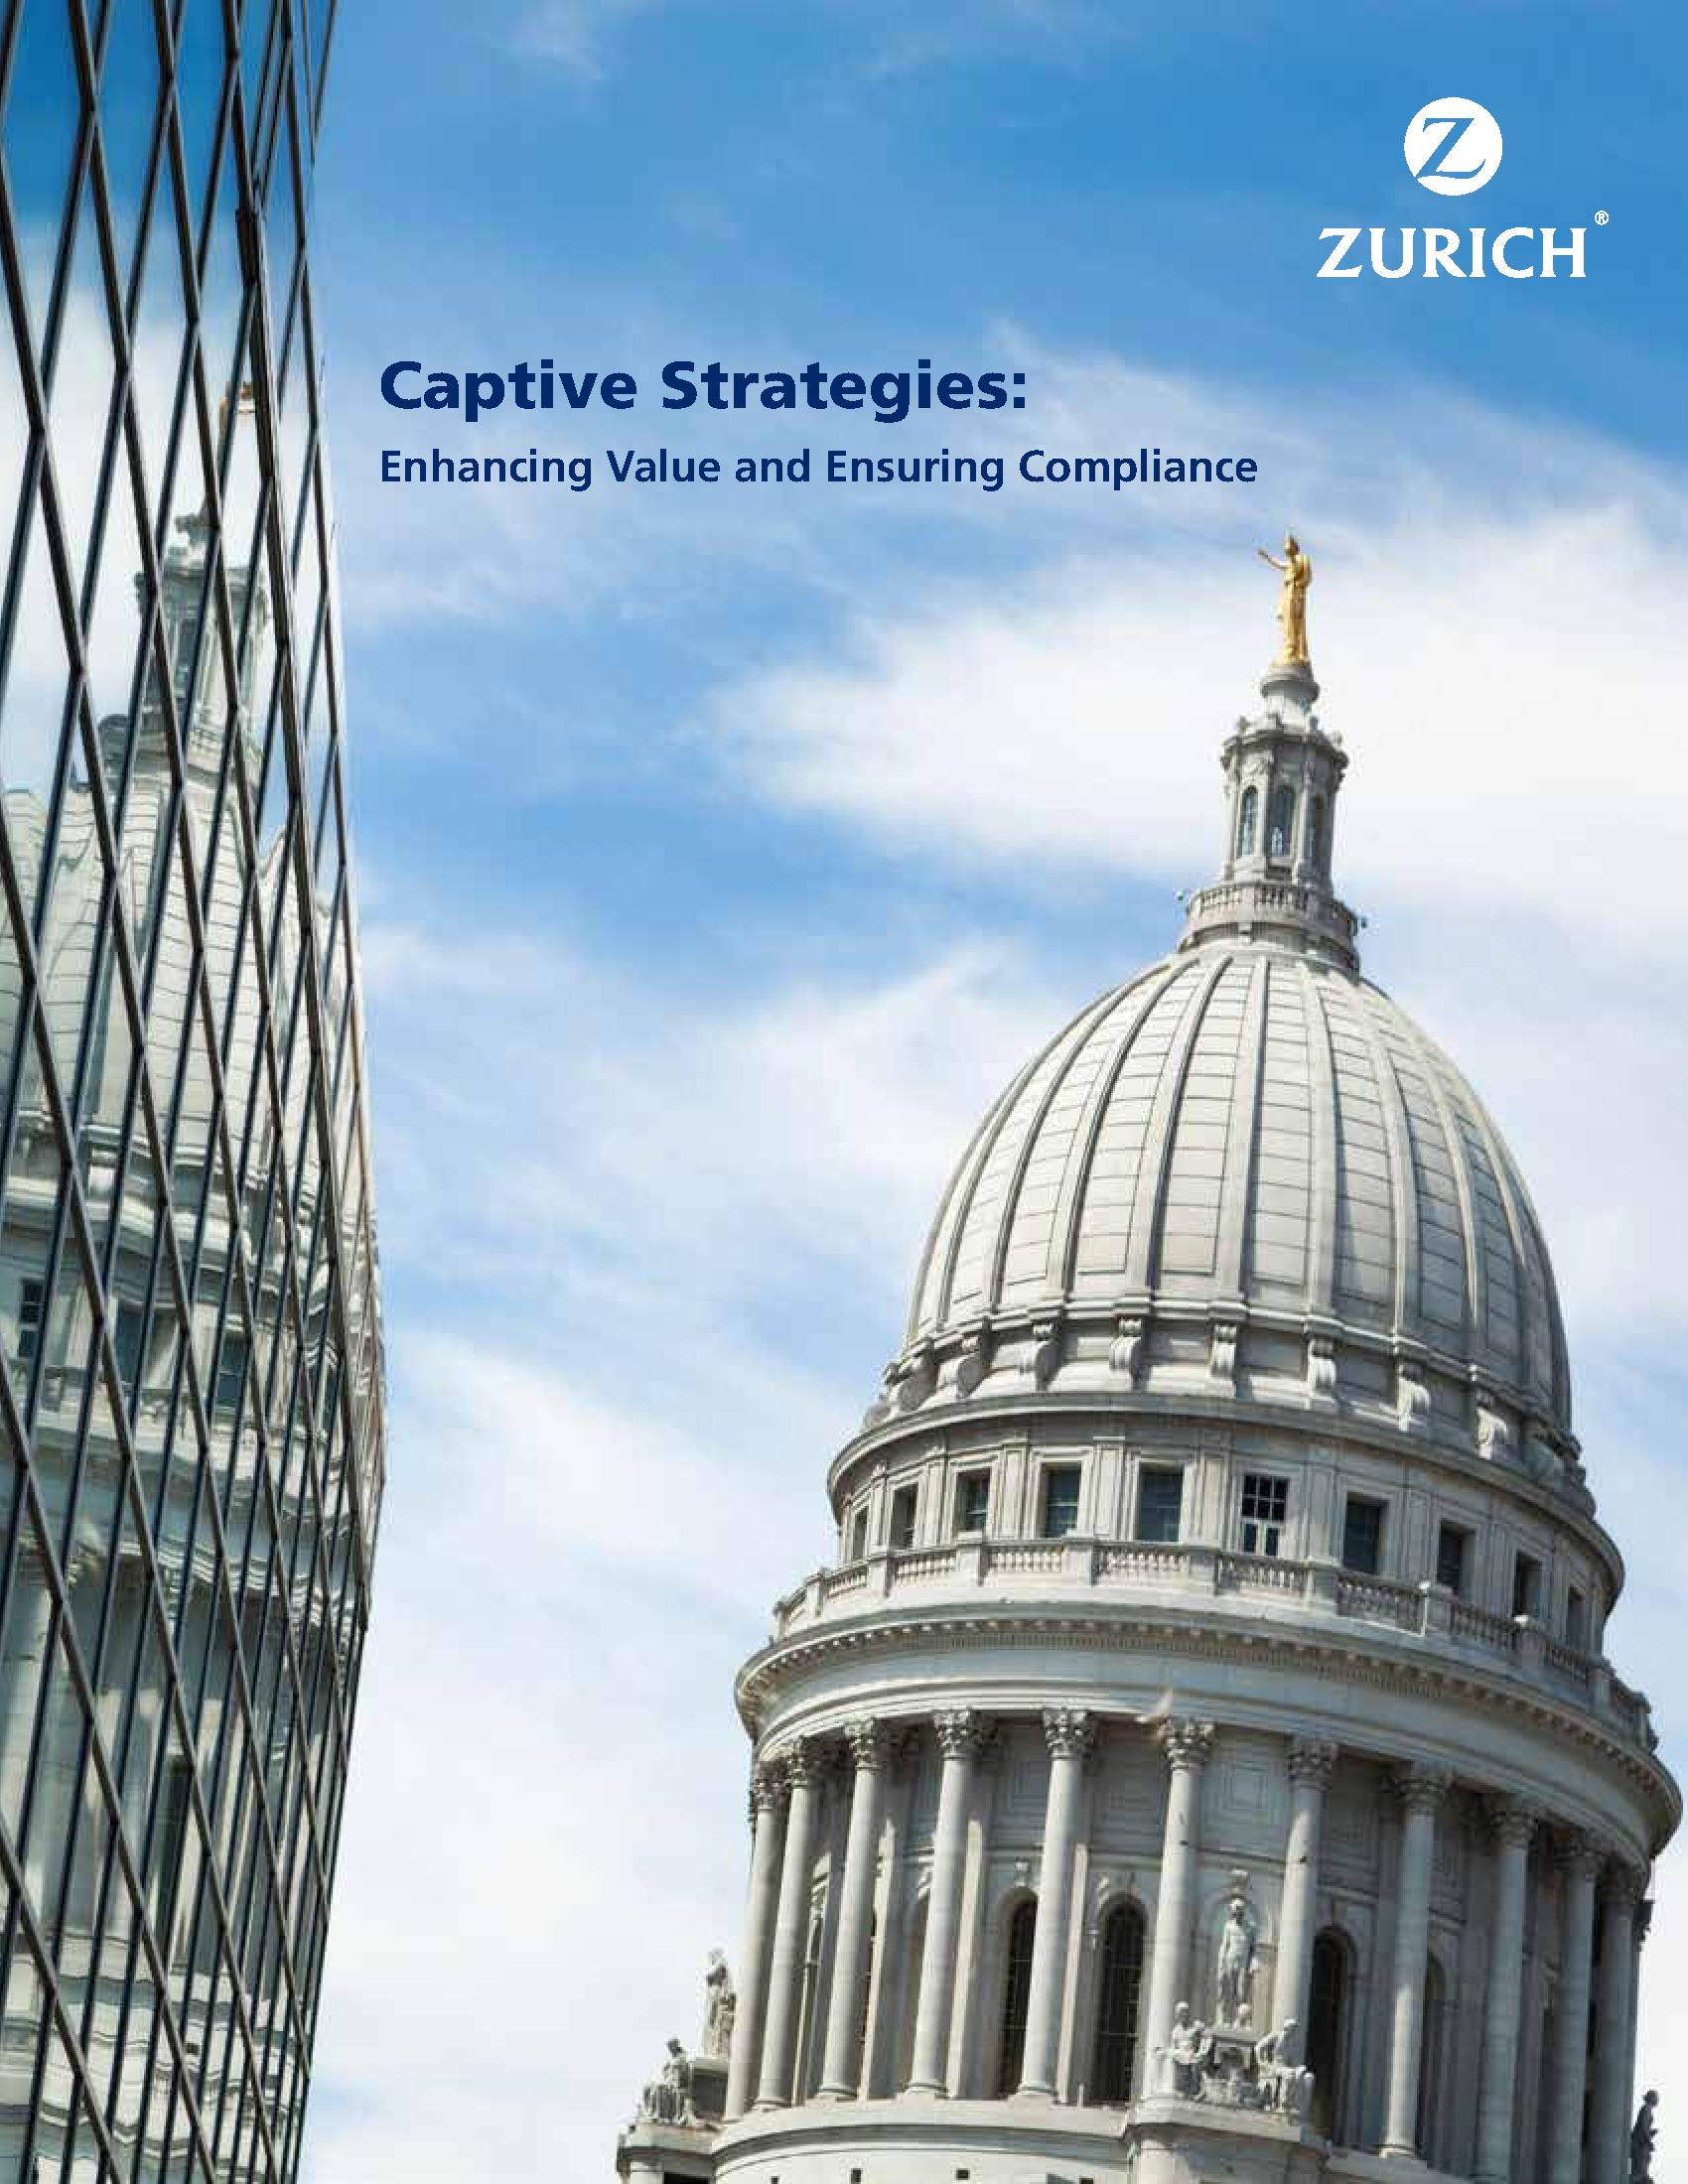 Captive Strategies: Enhancing Value and Ensuring Compliance